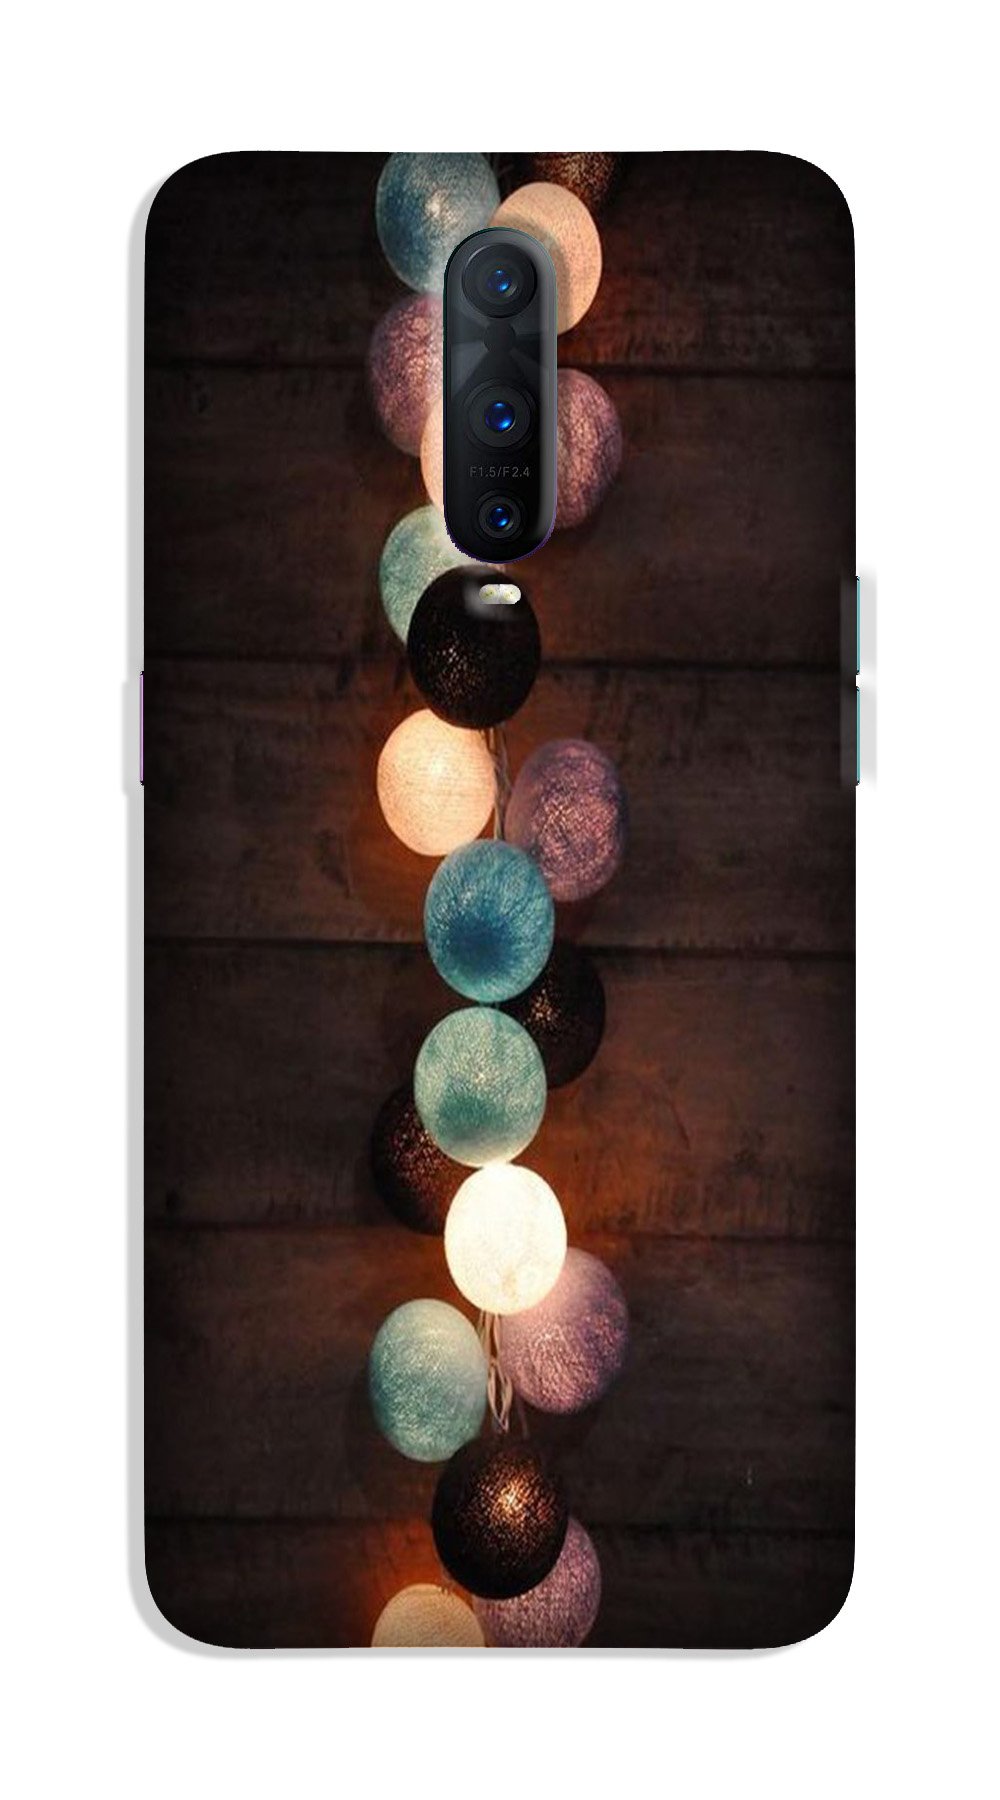 Party Lights Case for OnePlus 7 Pro (Design No. 209)